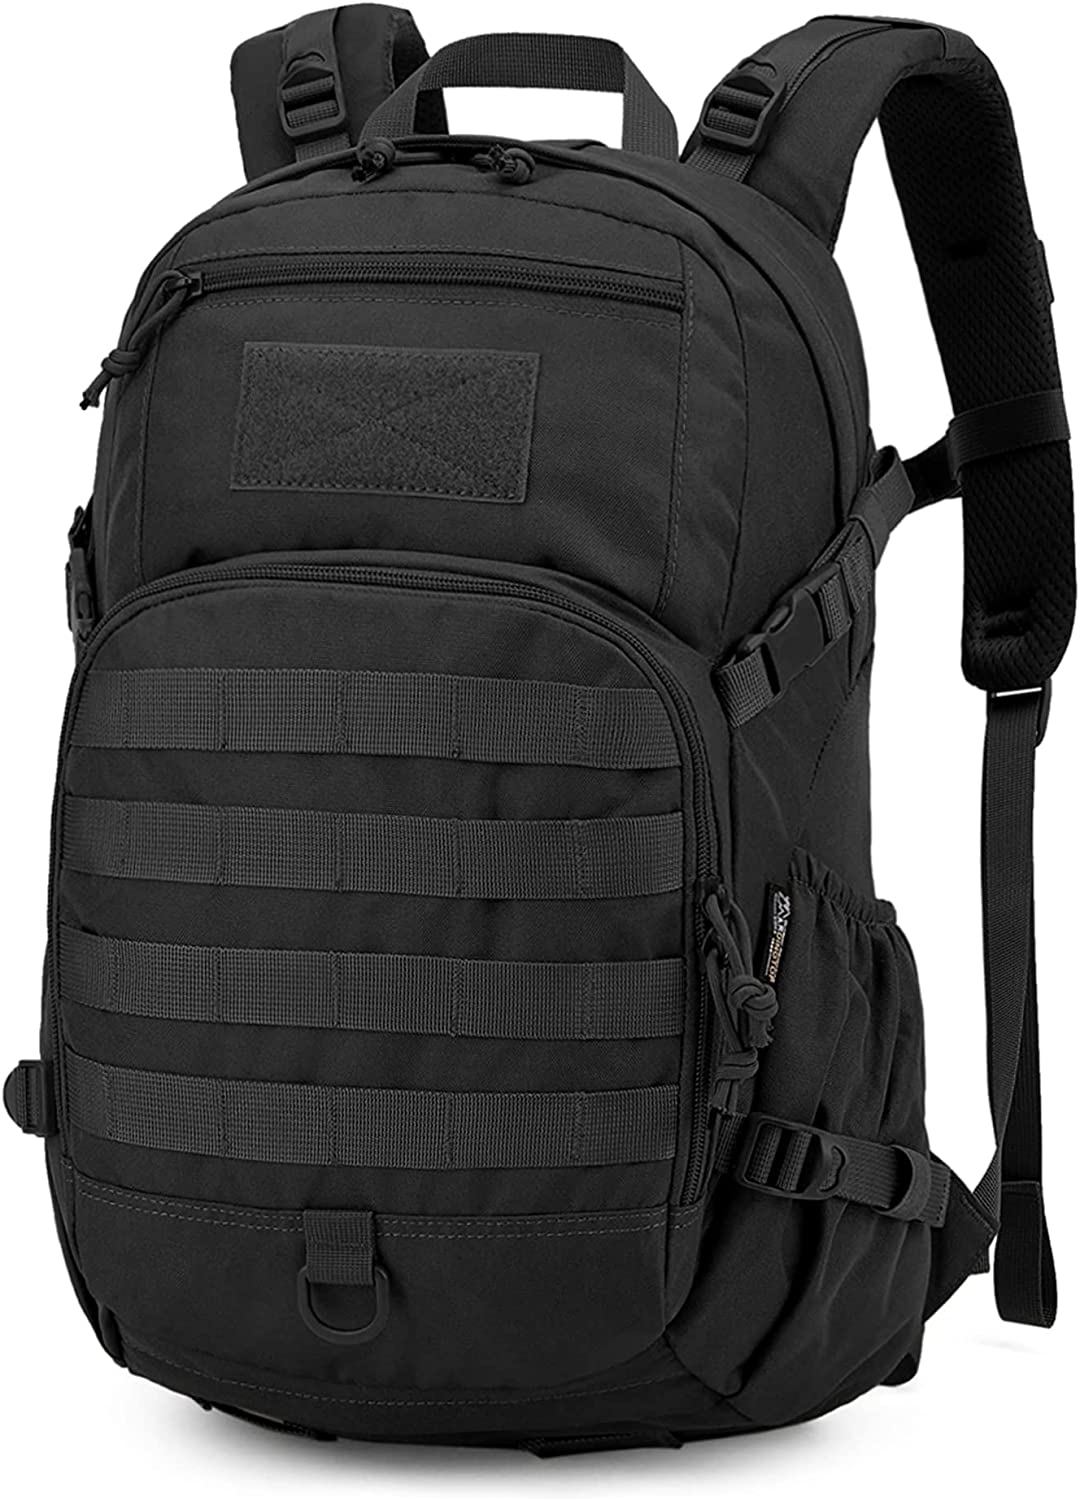 Mardingtop Small Tactical Backpack,Molle Hiking Backpack for Backpacking,Cycling and Biking 20L/25L